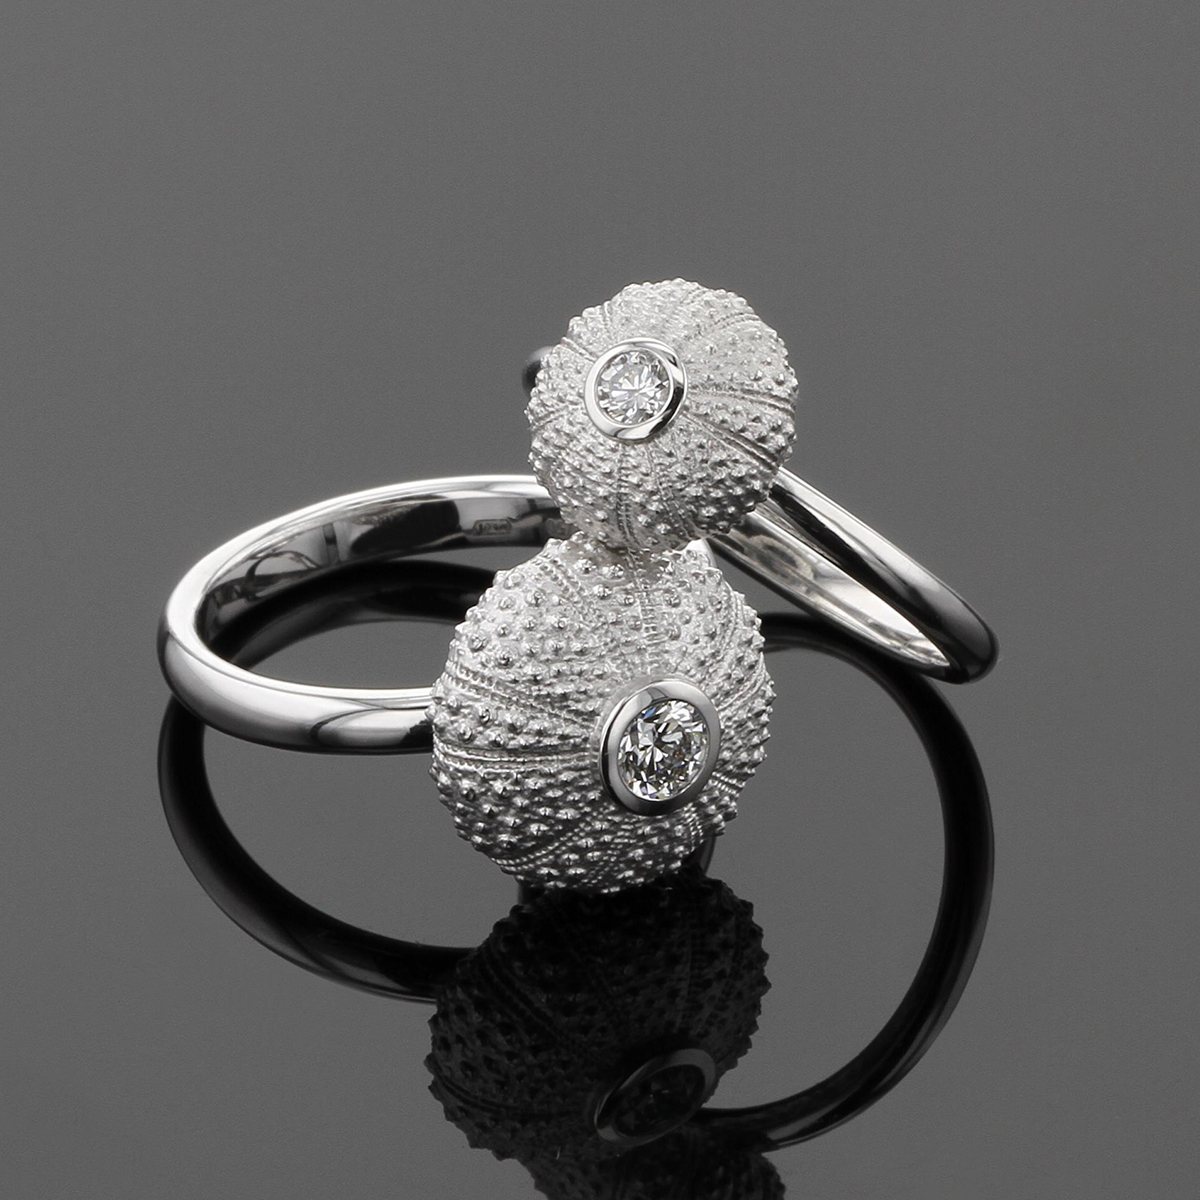 Sea urchin rings in white gold with diamonds.